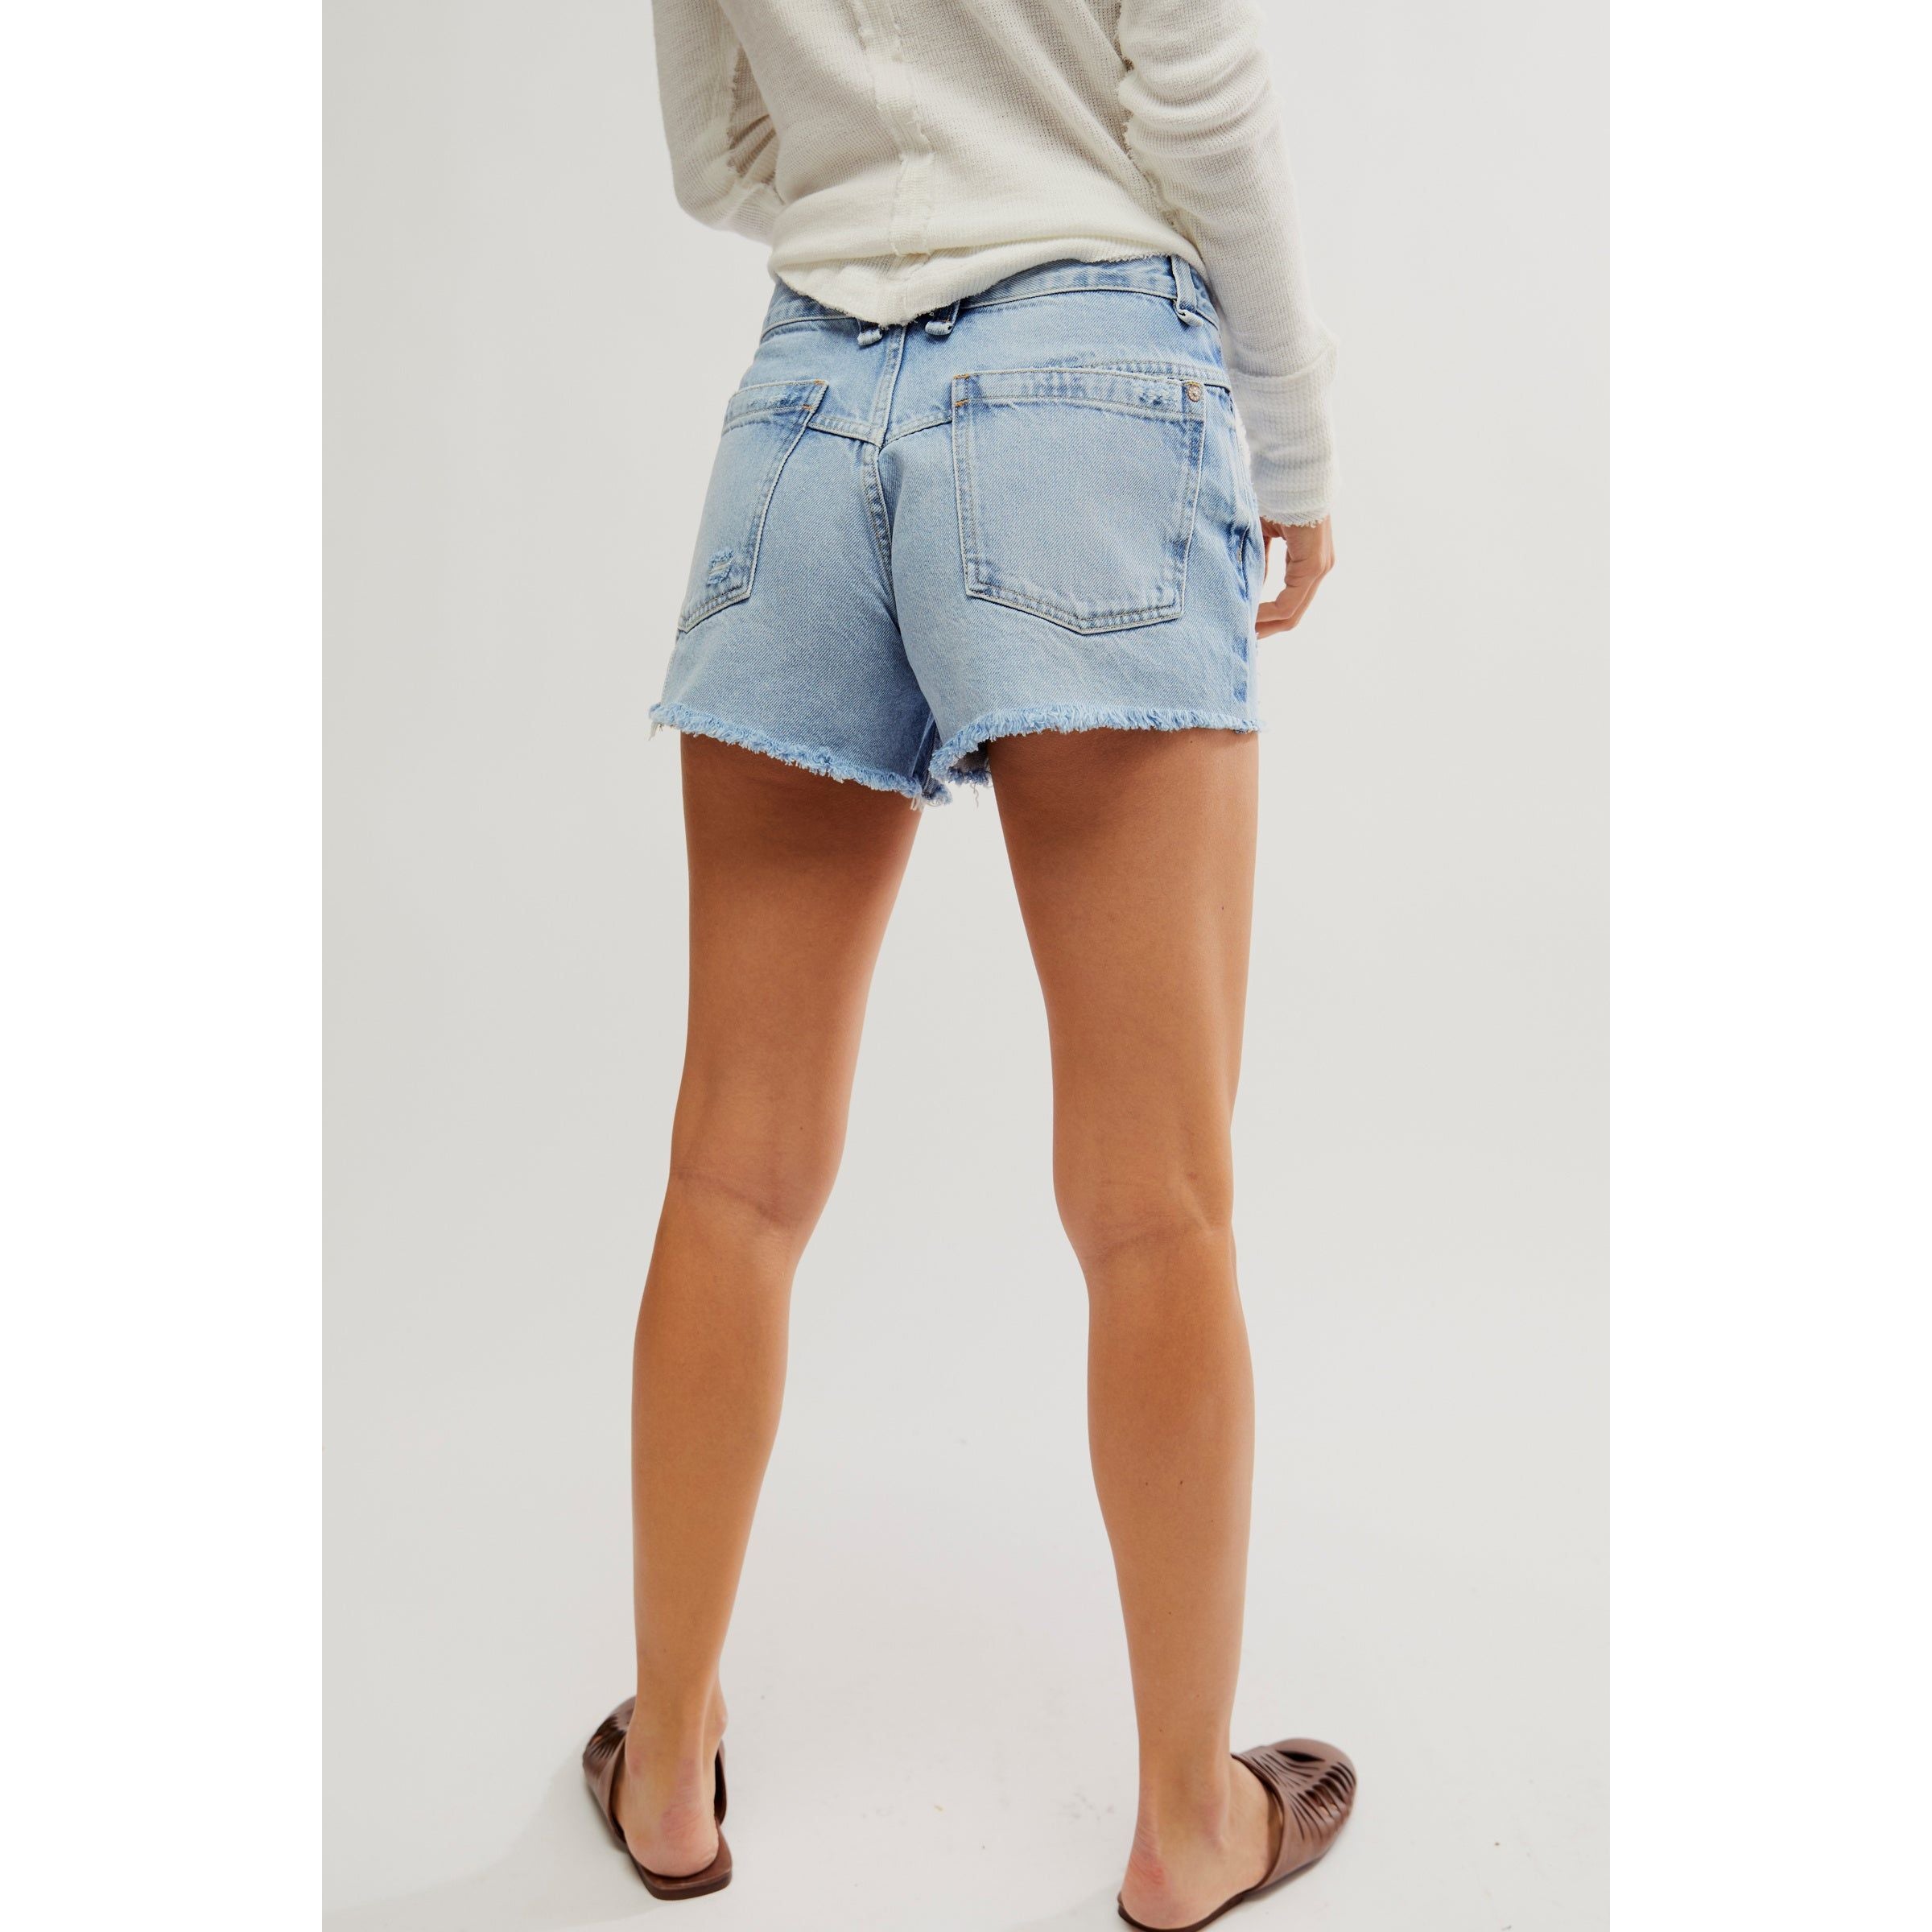 Free People - Now Or Never Denim Shorts in Moon Child